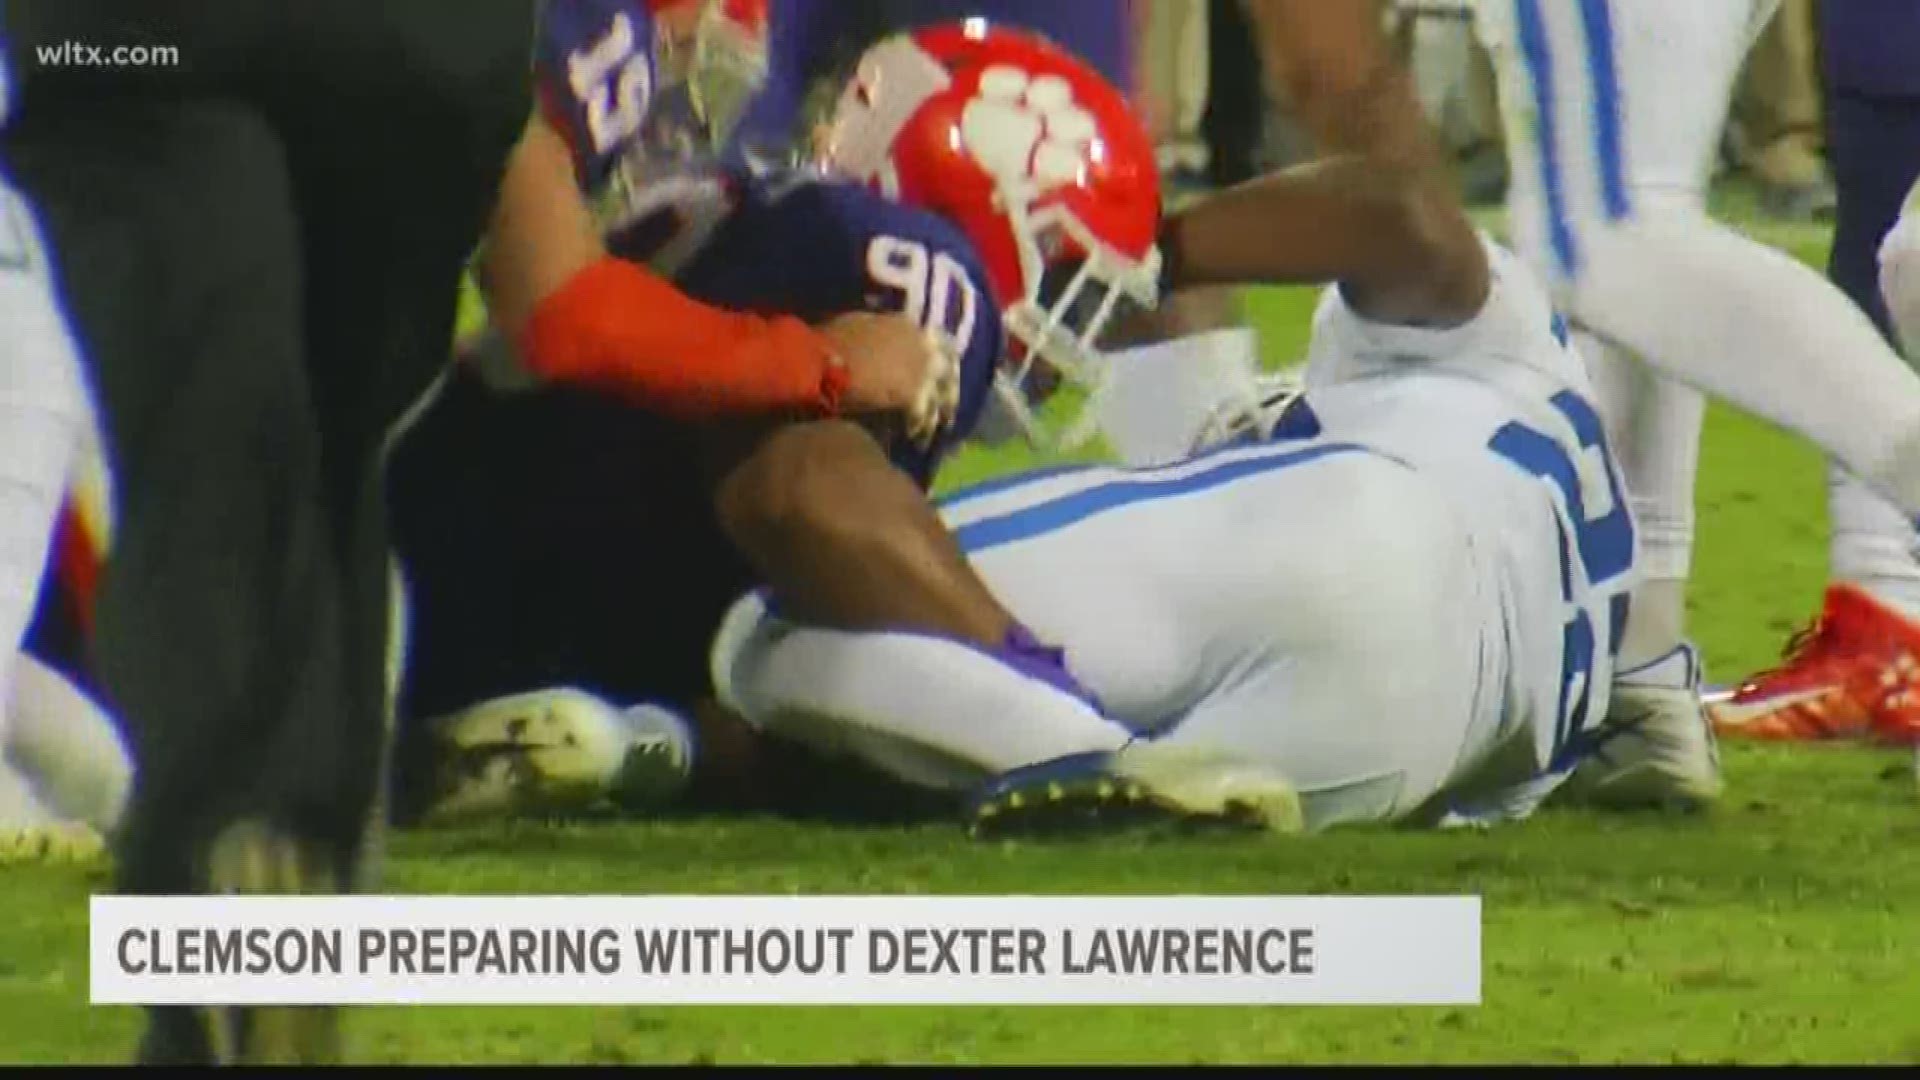 Clemson is preparing for the Cotton Bowl as if defensive tackle Dexter Lawrence will not be available.